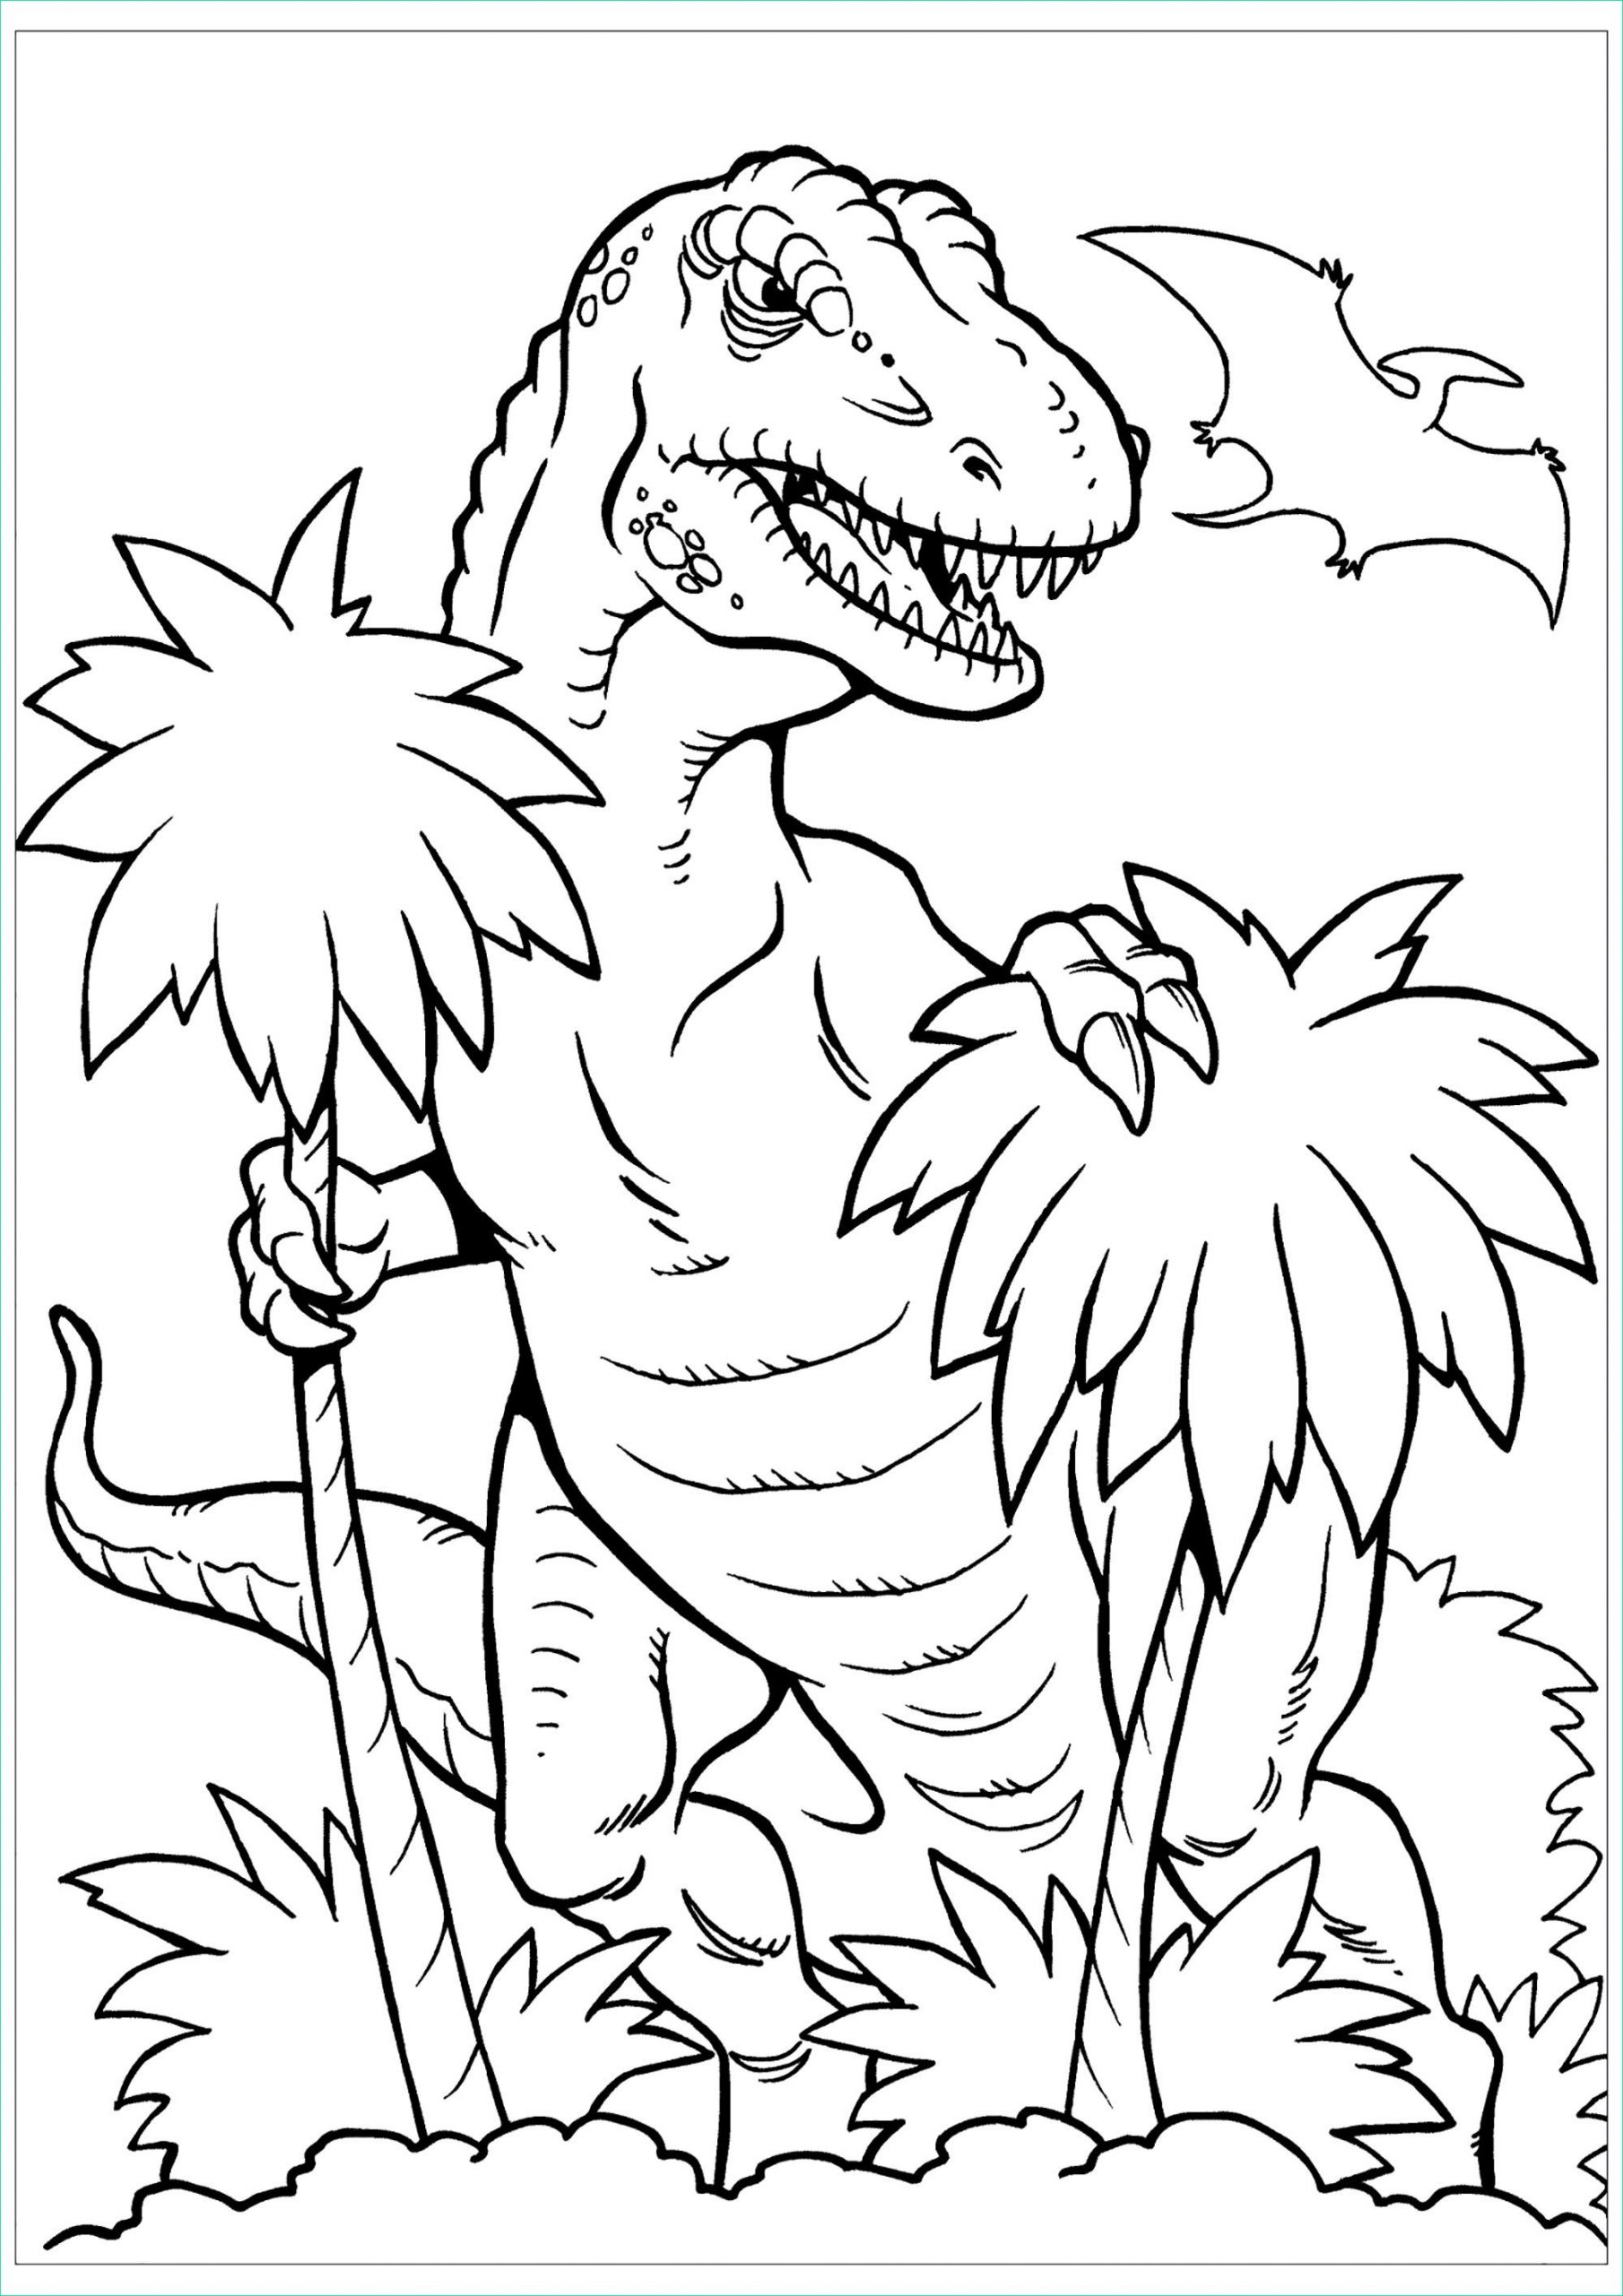 image=dinosaurs coloring pages for children dinosaurs 1